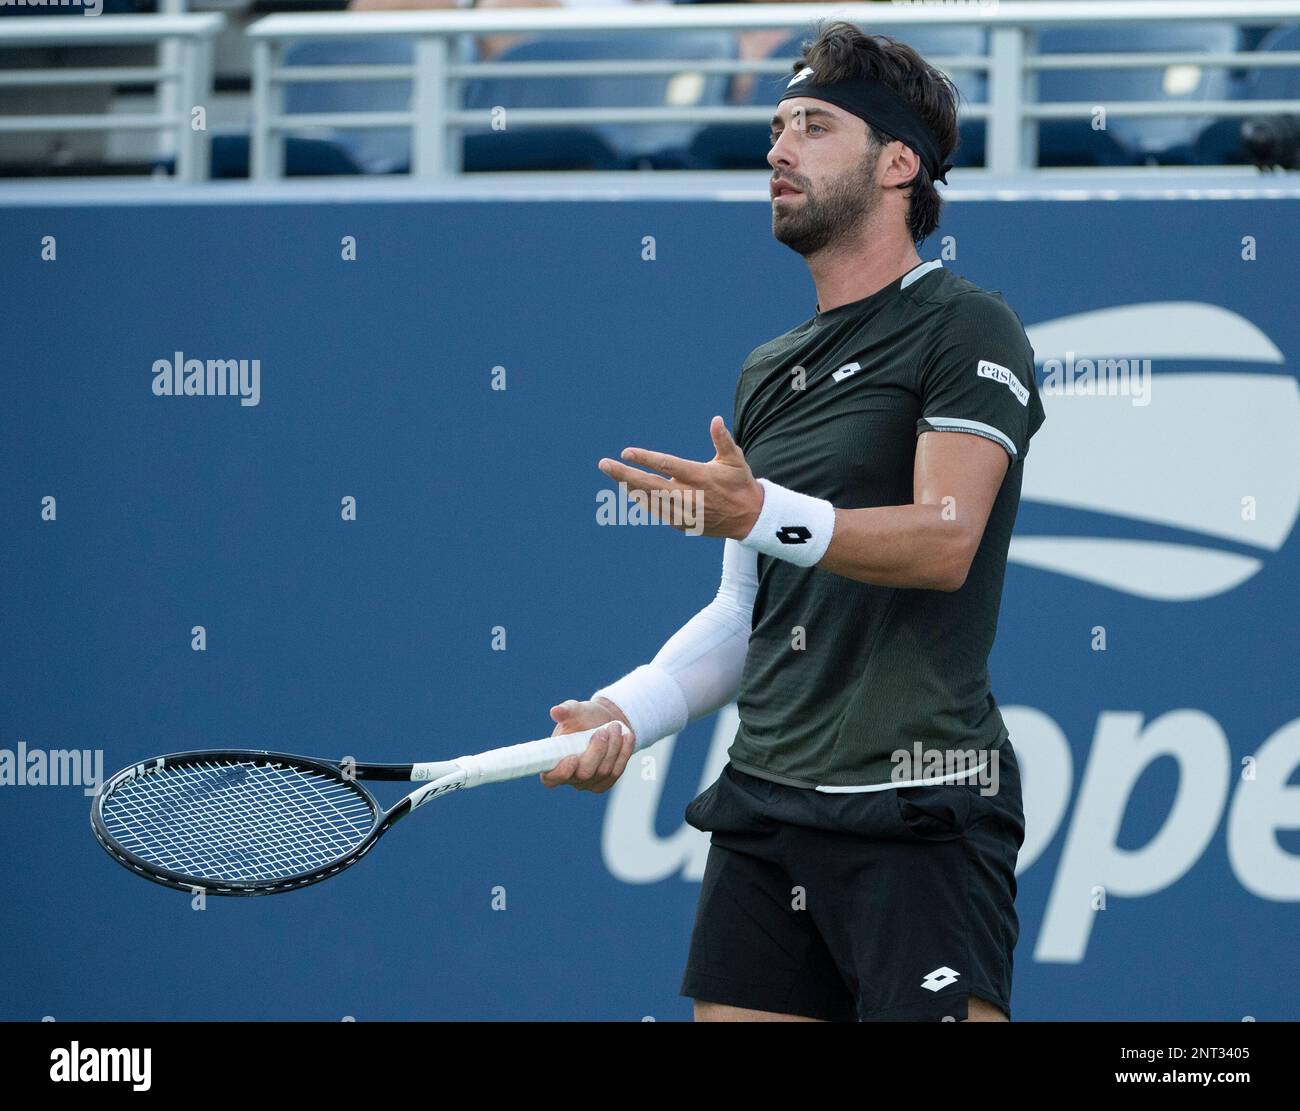 August 30,2019 Nikoloz Basilashvili (GEO) loses to Dominik Koepfer (GER) 6-3, 7-6, 4-6, 6-1, at the US Open being played at Billie Jean King National Tennis Center in Flushing, Queens, NY